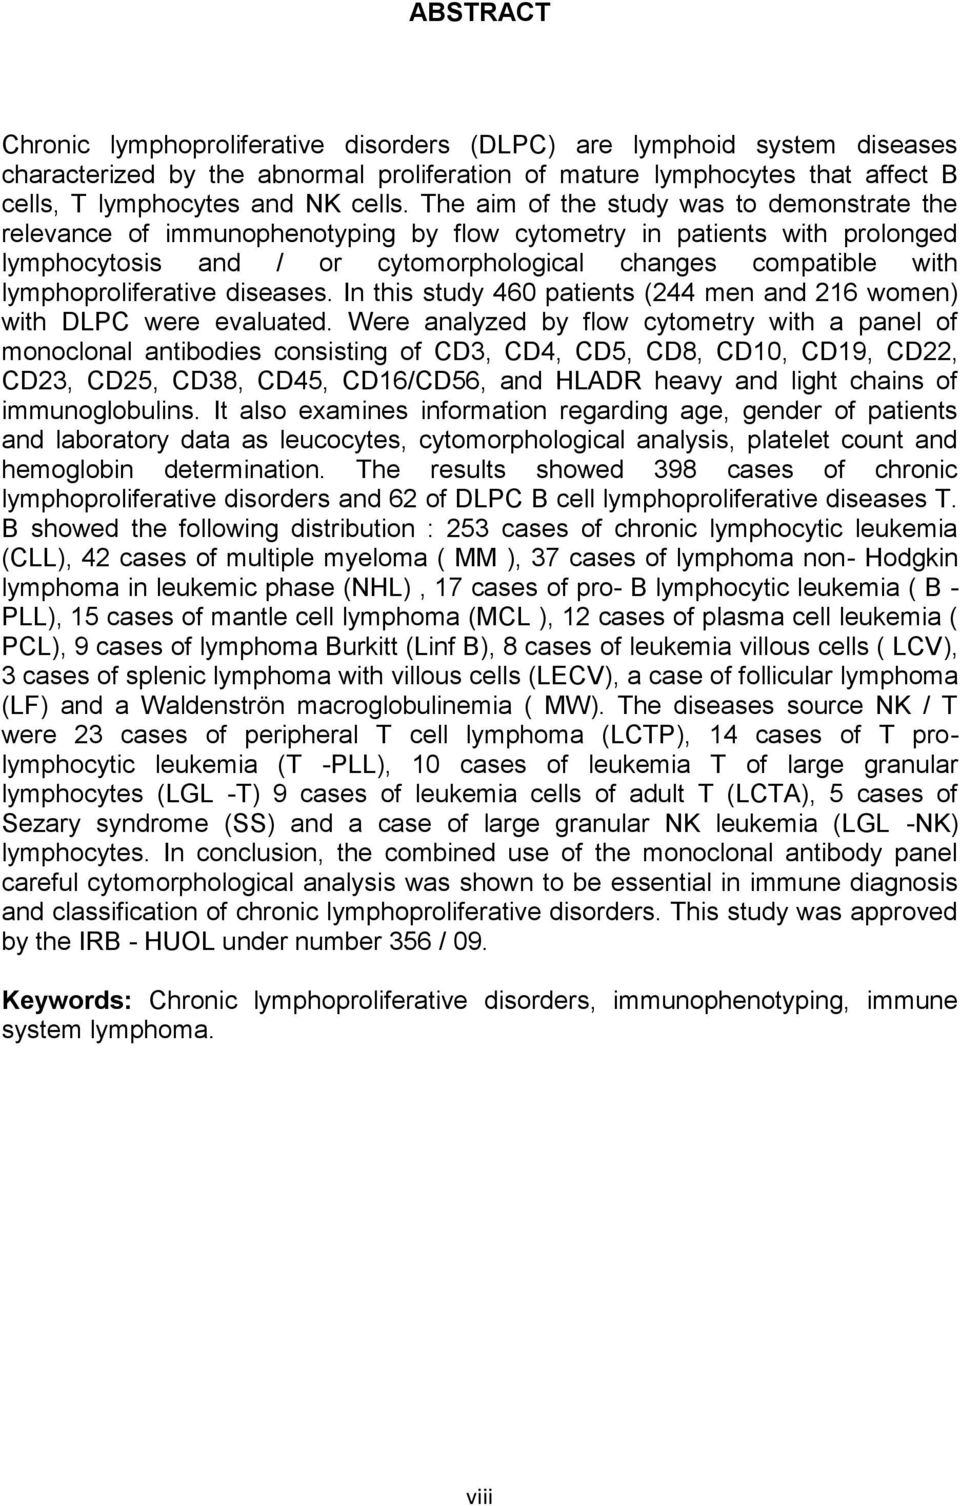 lymphoproliferative diseases. In this study 460 patients (244 men and 216 women) with DLPC were evaluated.